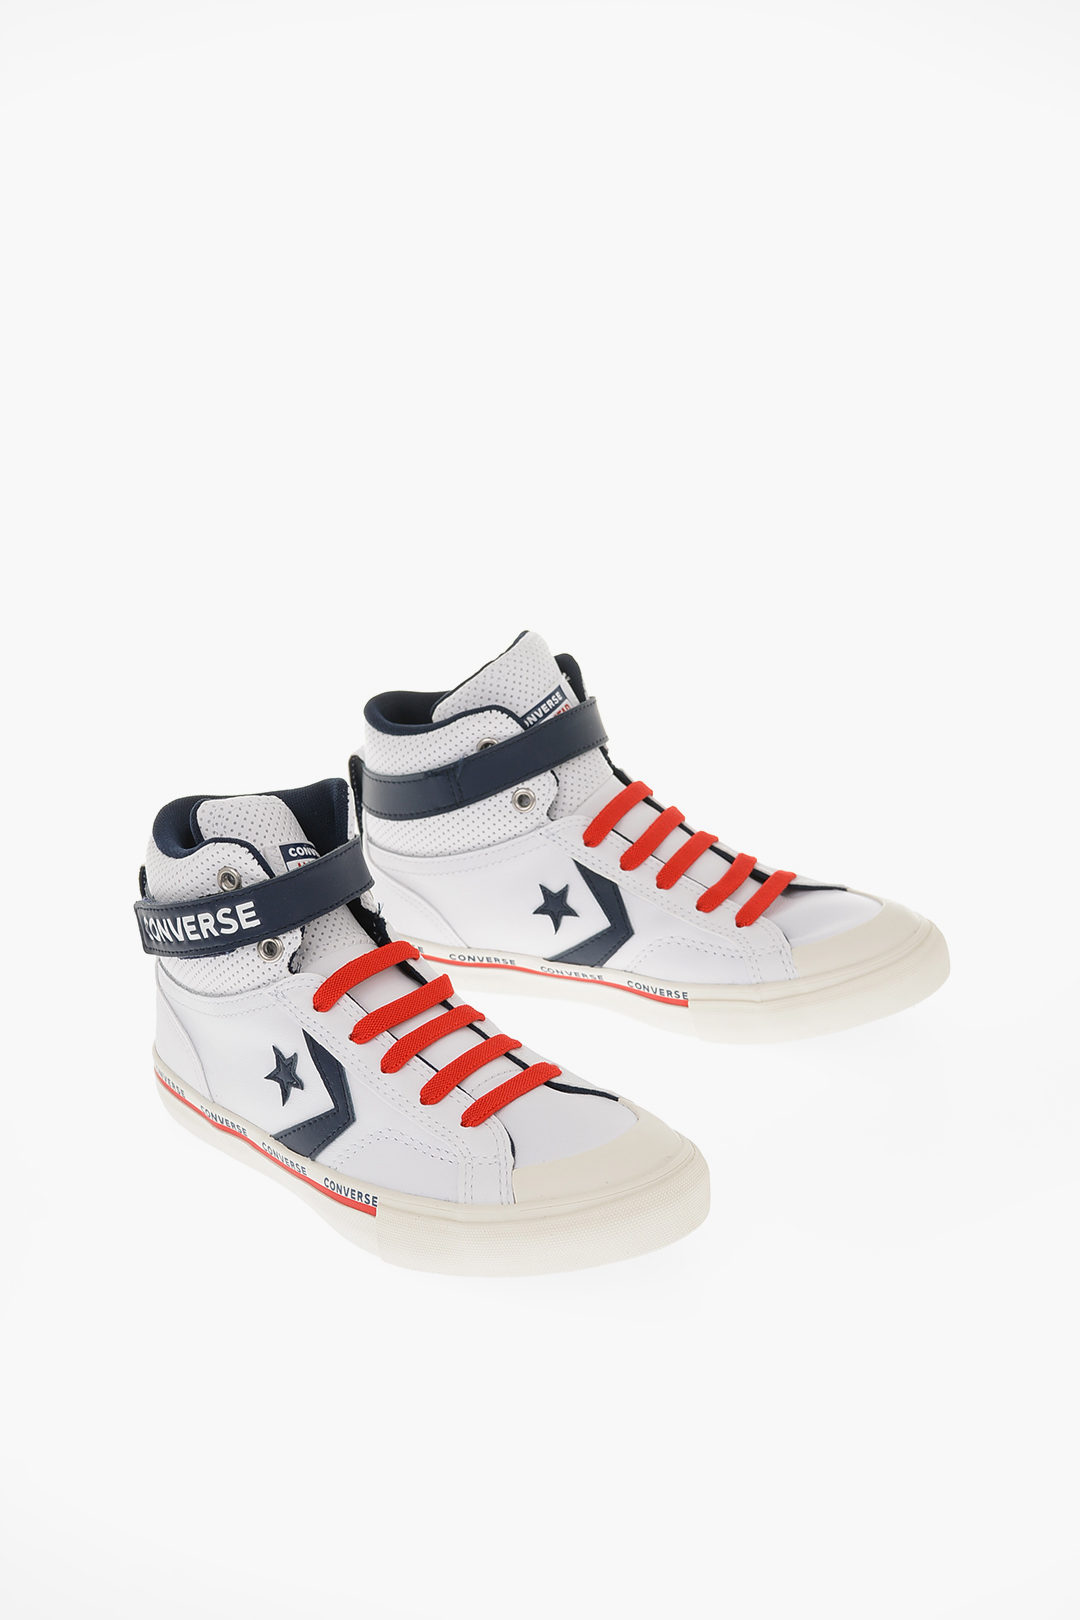 kids leather high top converse